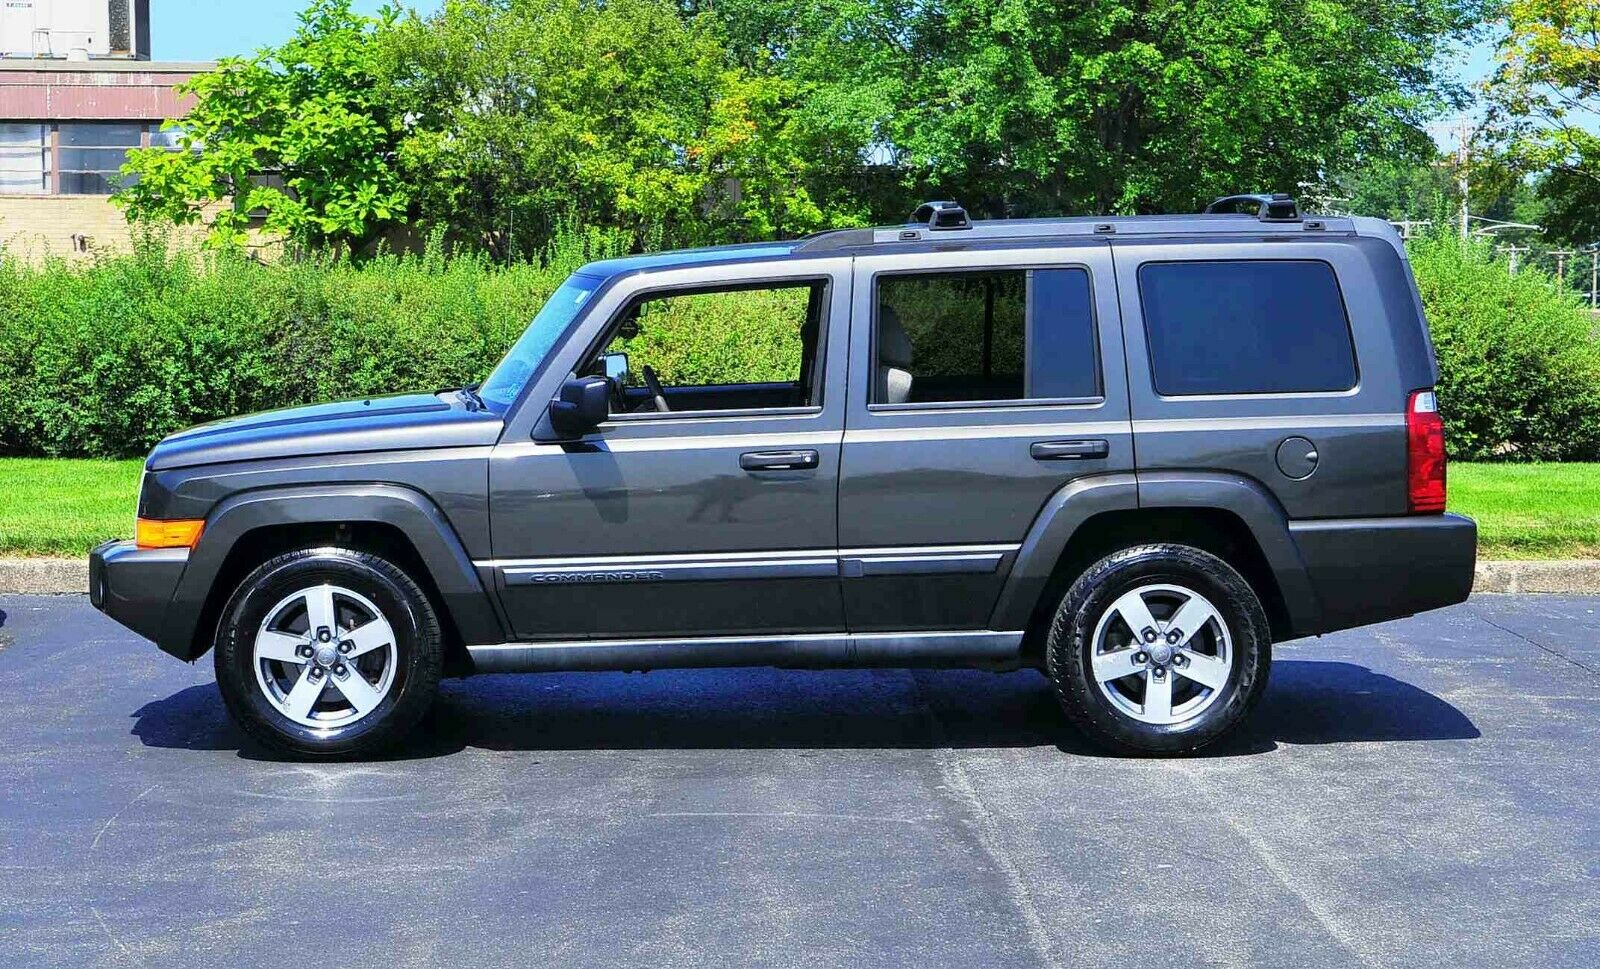 2006 Jeep Commander  3rd Row 7 Passenger Serviced Carfax New Brakes Tires Inspected 4wd Clean